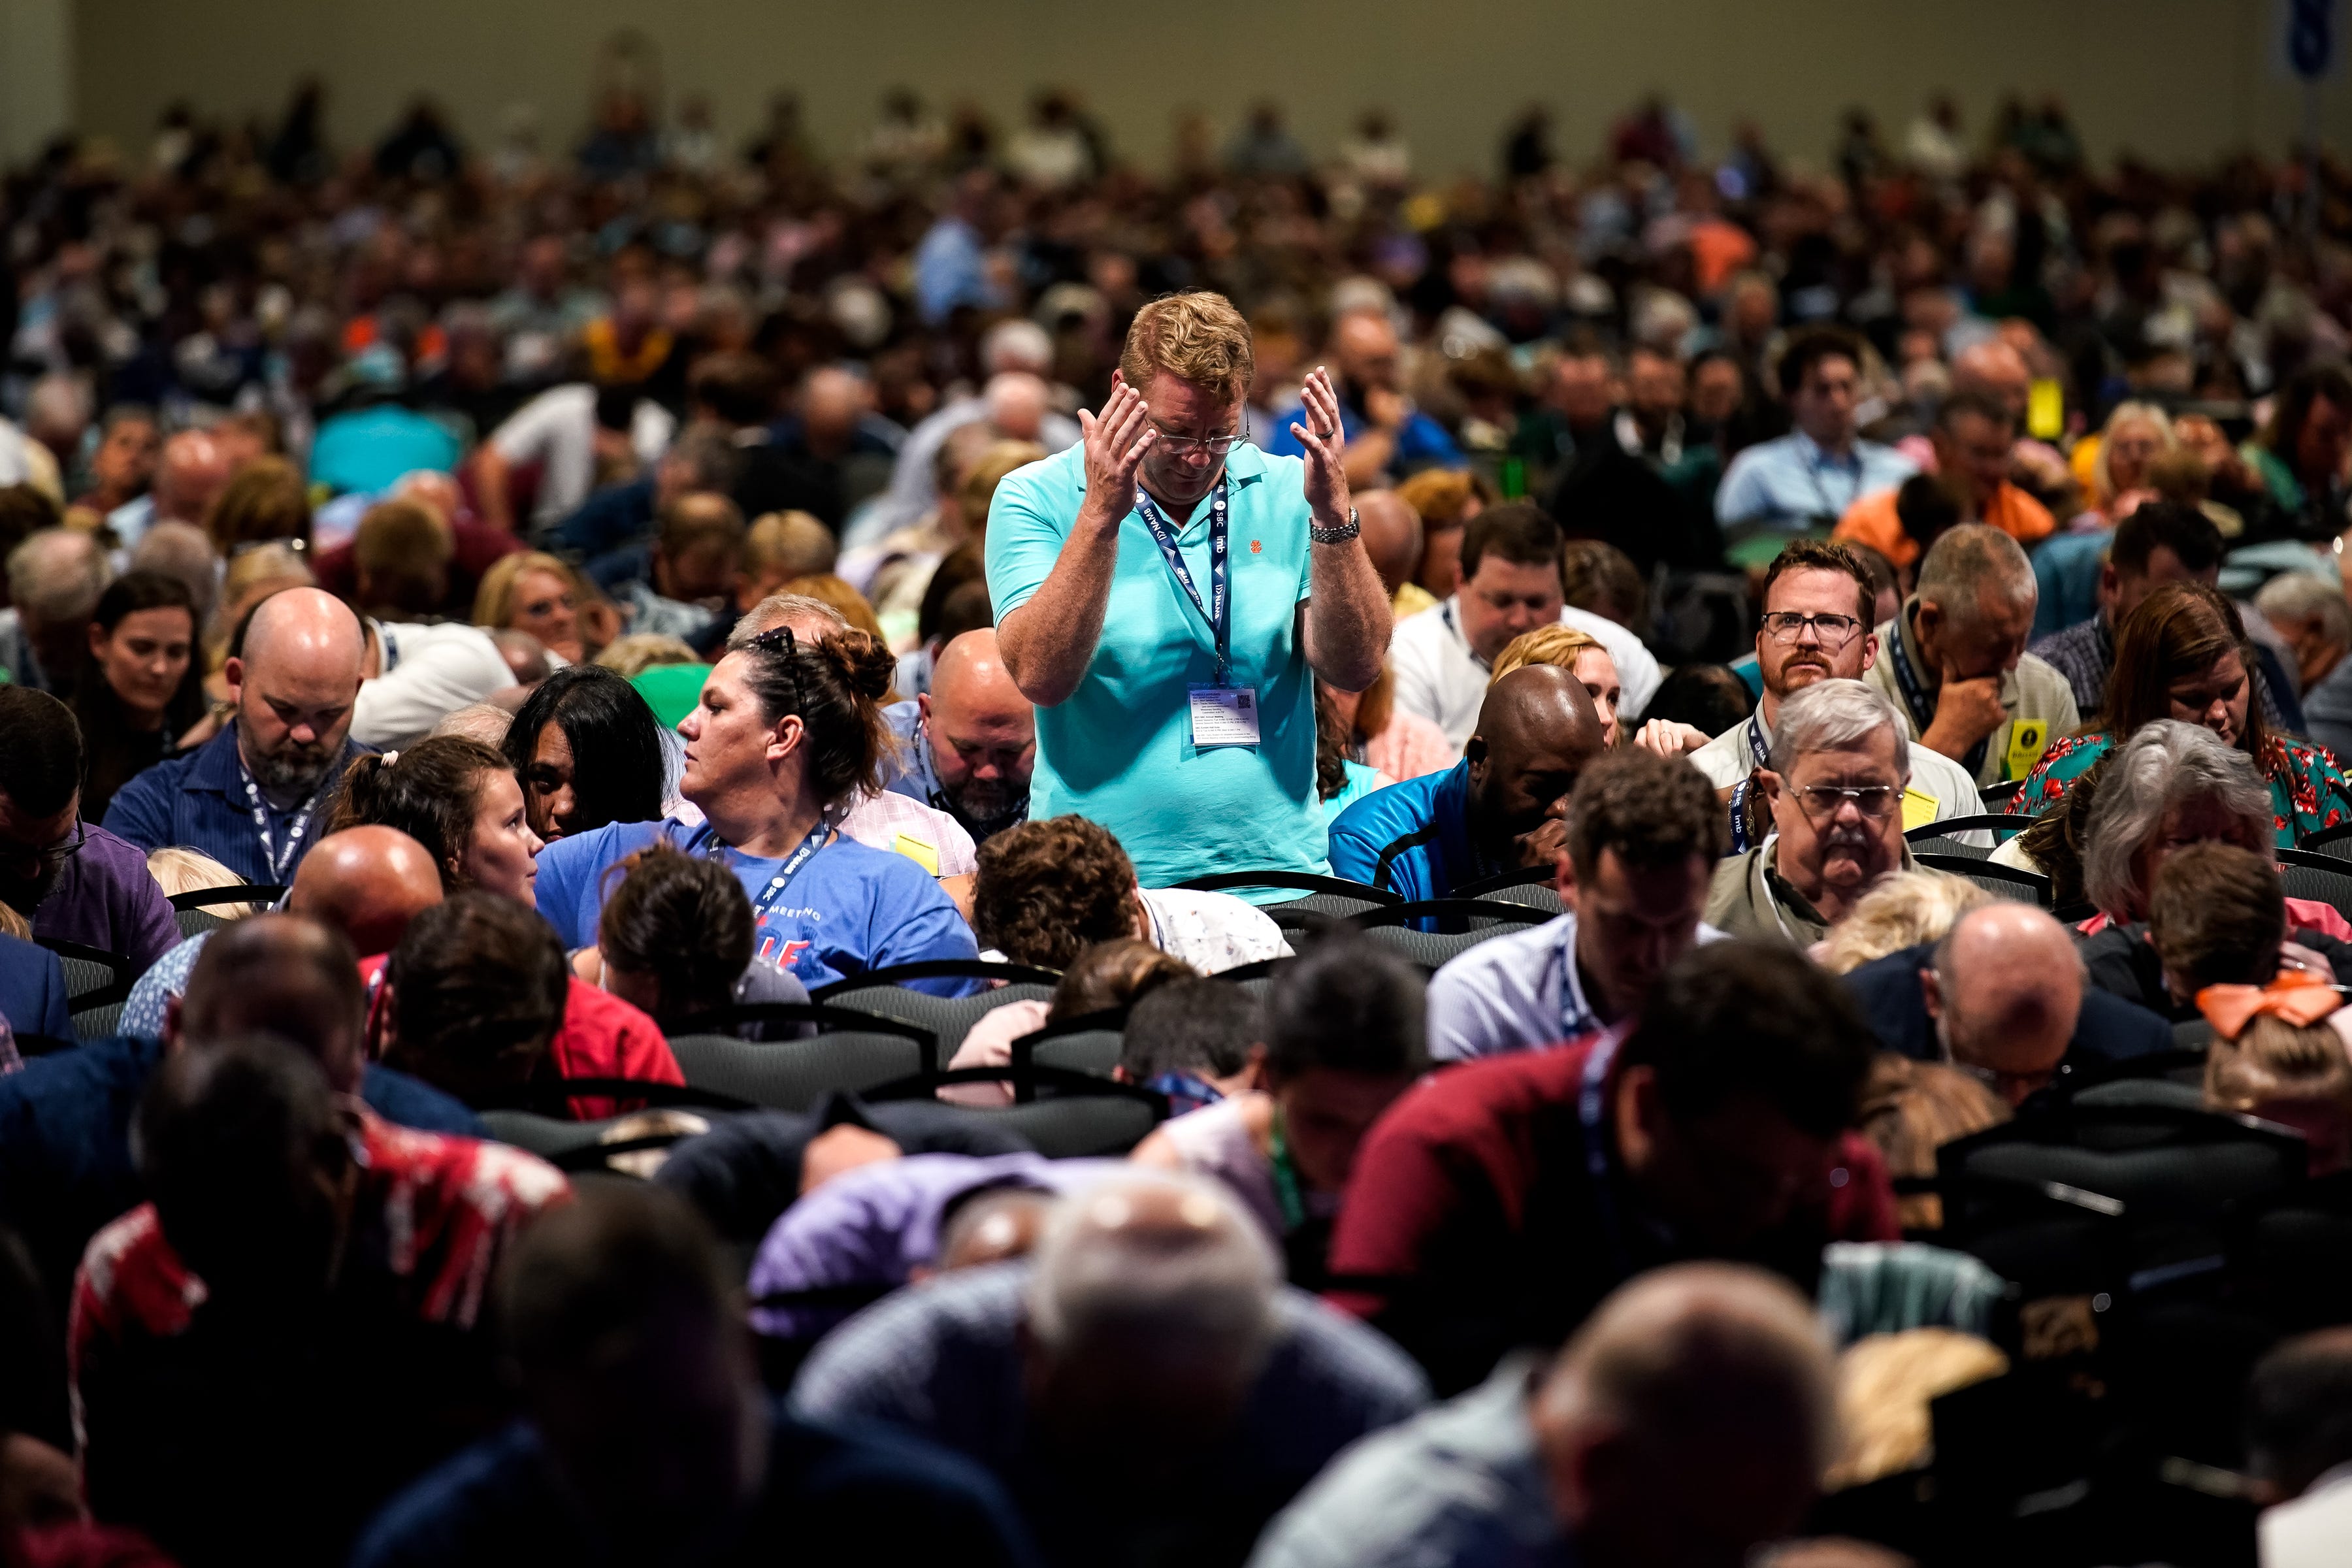 Southern Baptist Convention The journey to change the role for women